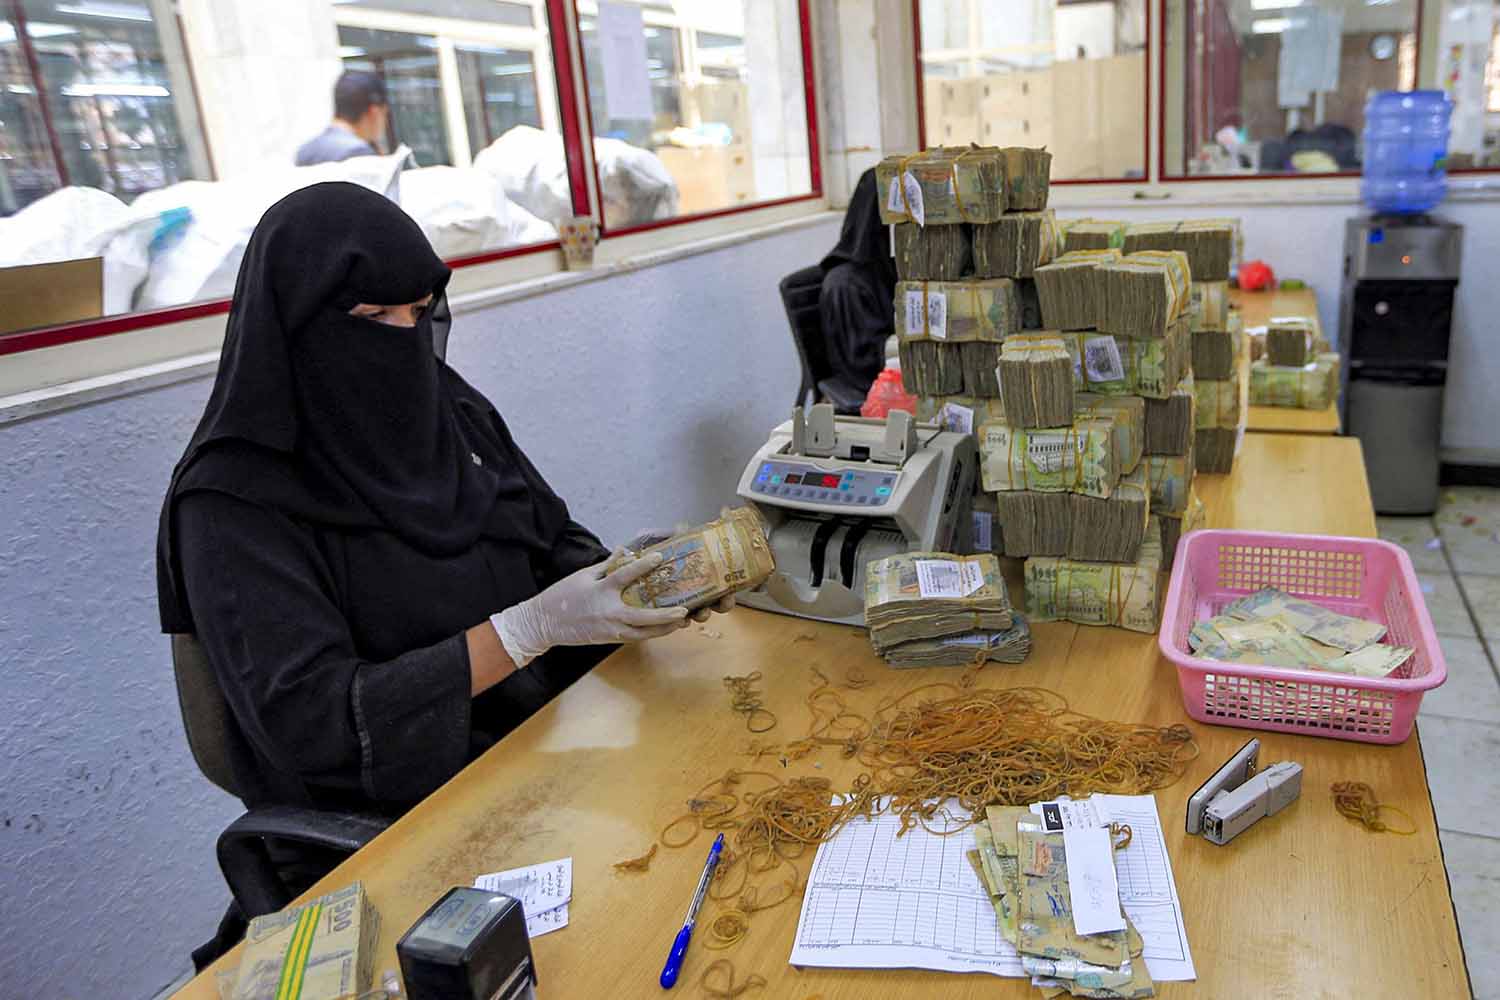 A rapid and uncontrolled decline in the Yemeni currency